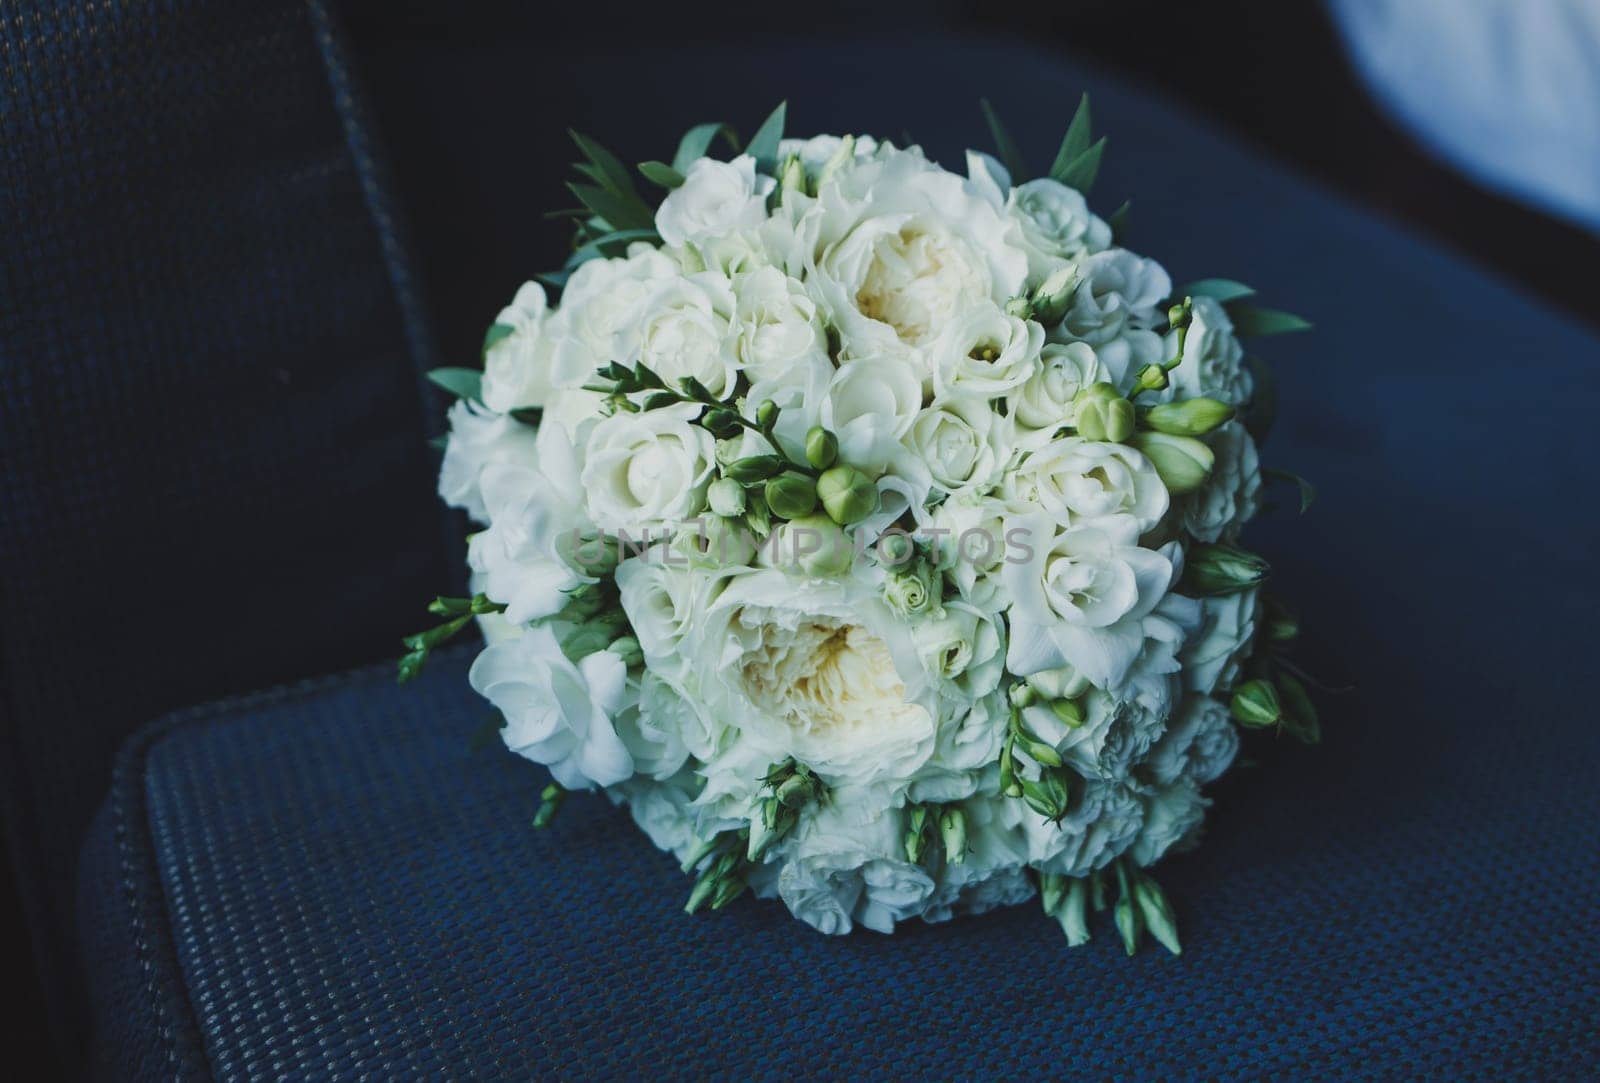 Vintage bridal bouquet at a wedding day